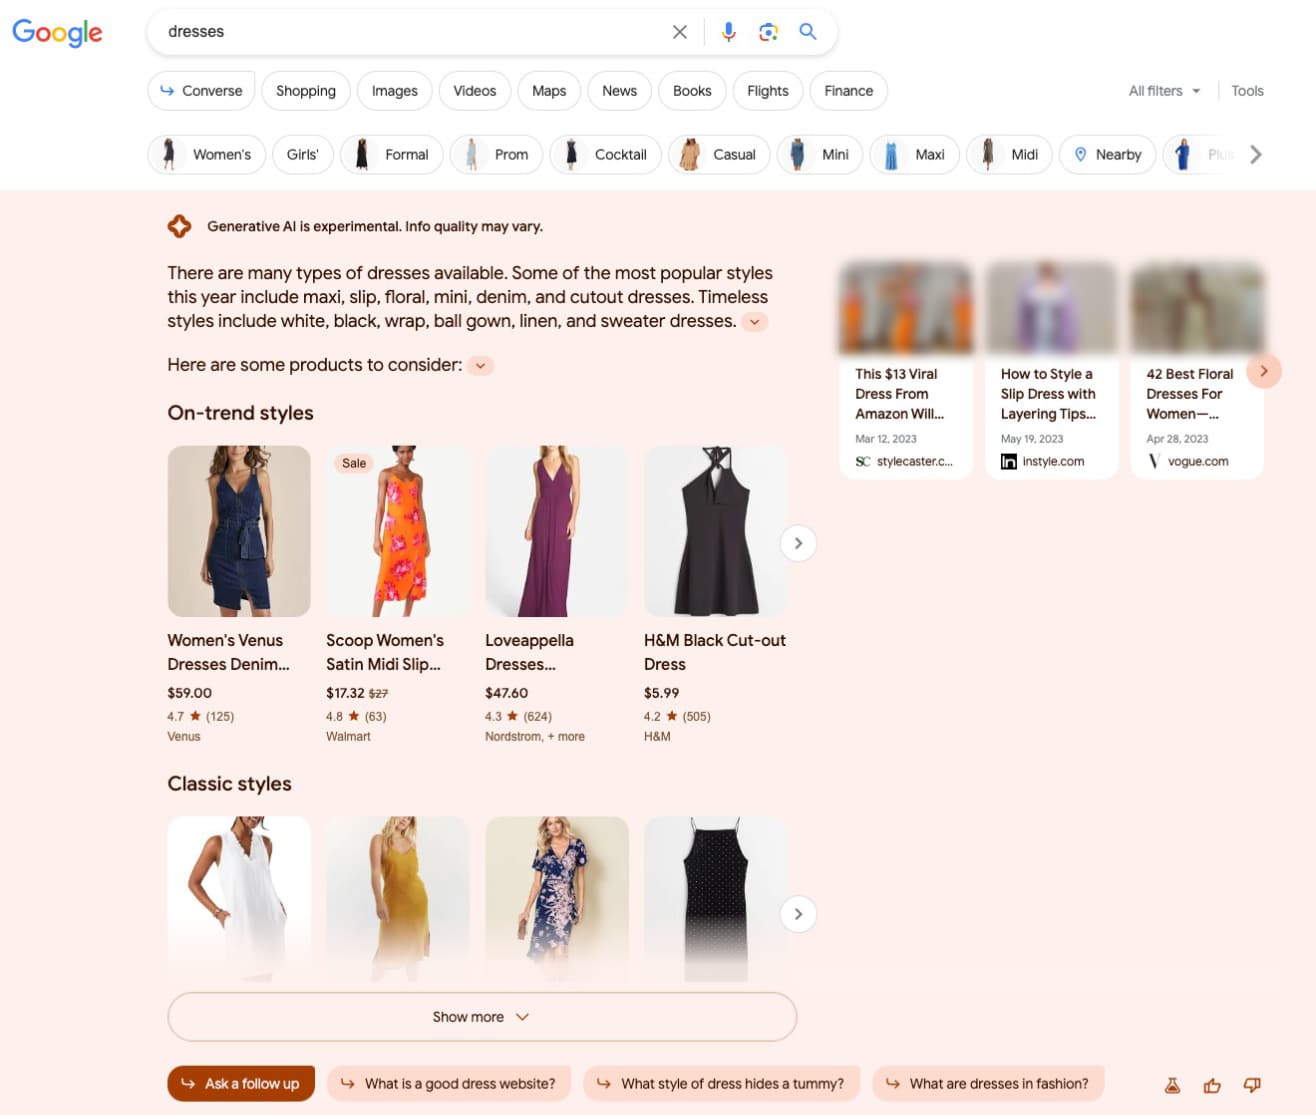 A screenshot of the SERP for the query "dresses". The SGE response takes up a bigger chunk than the previous one. Its size is approximately double in comparison.